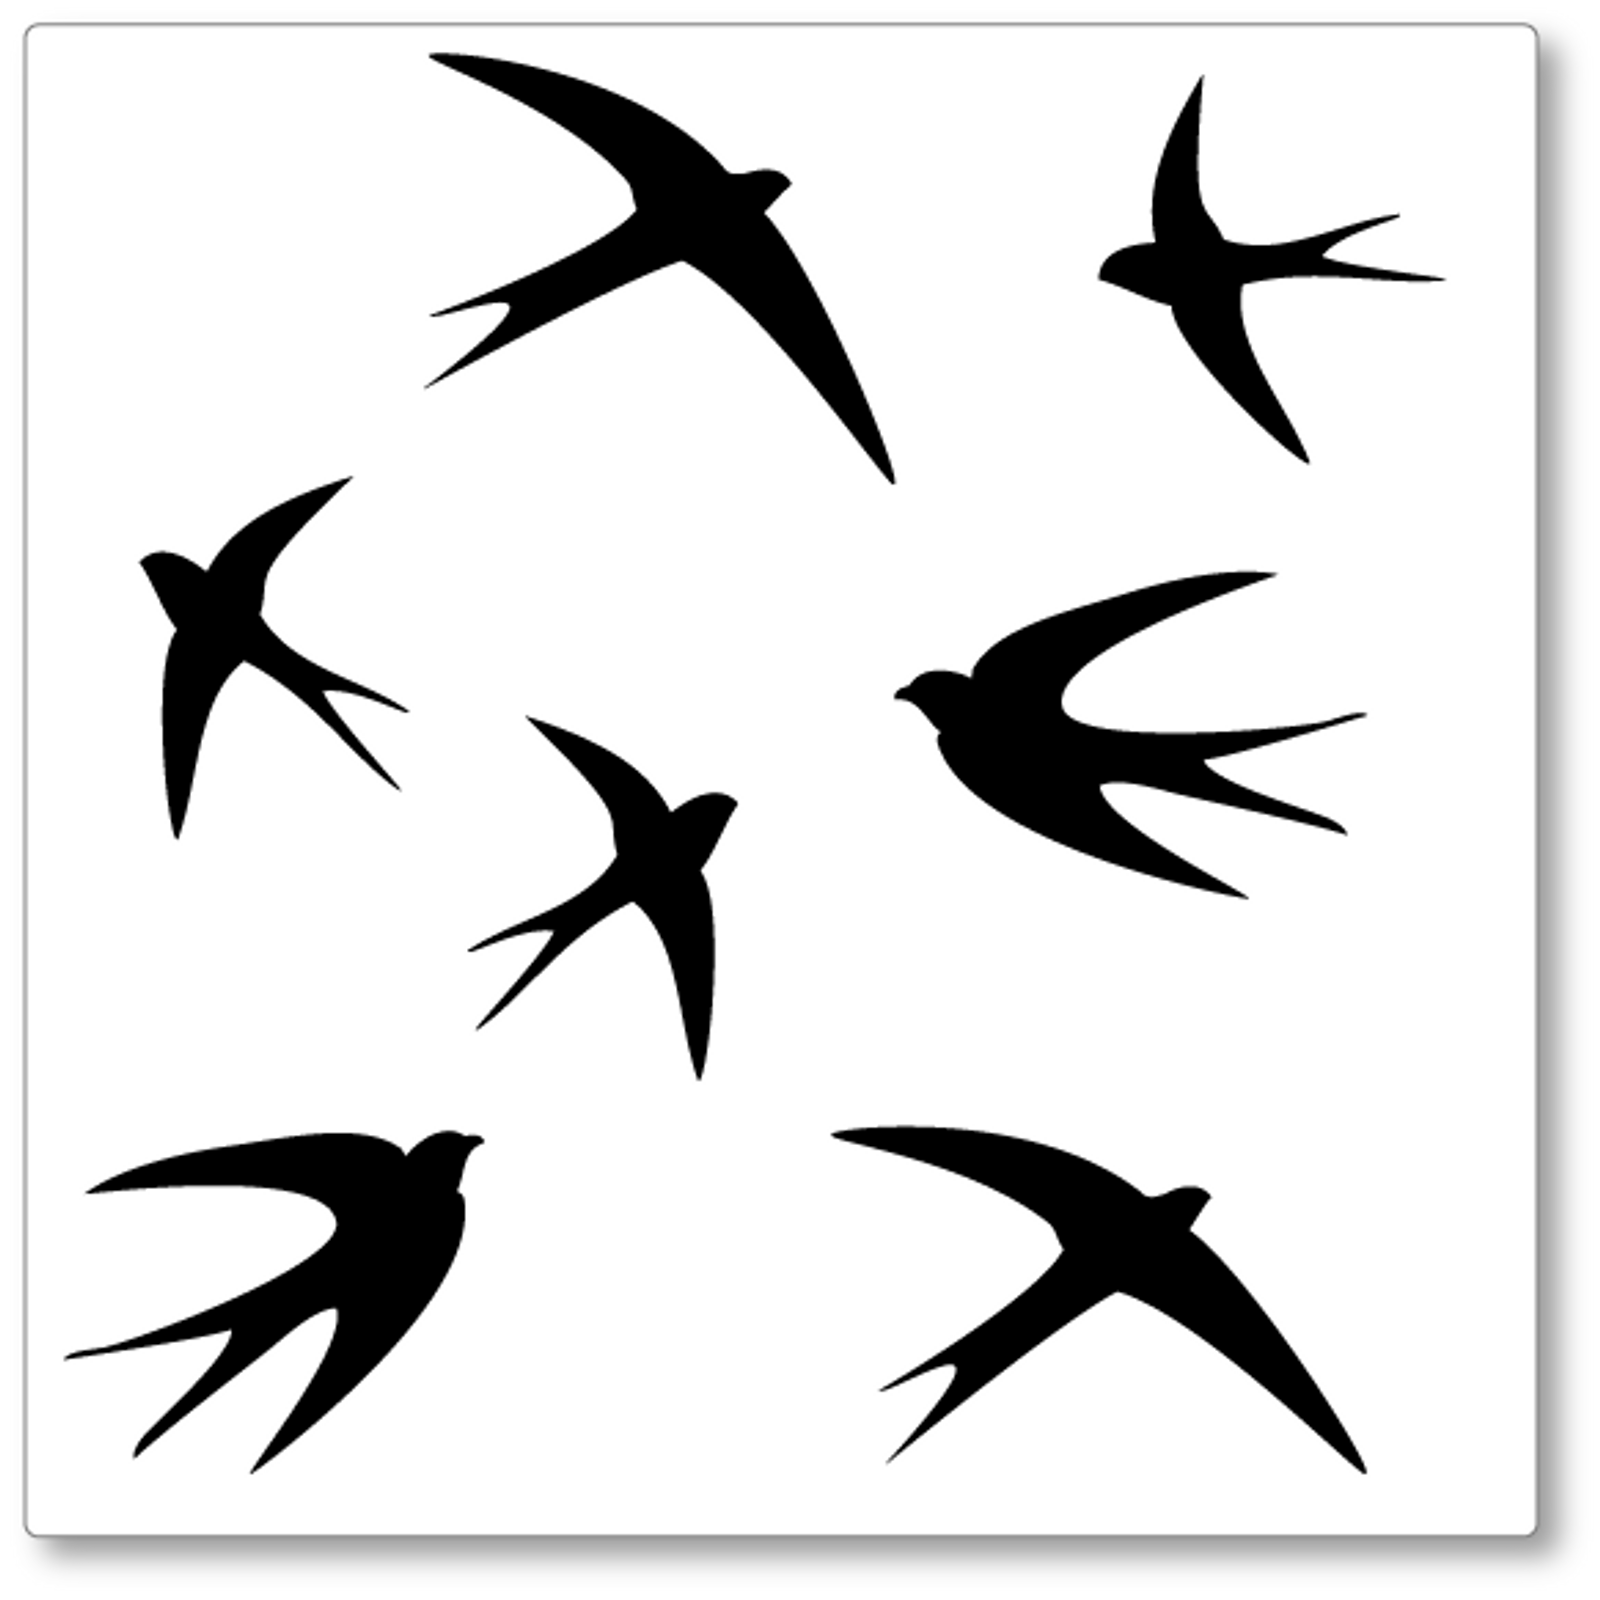 This set of seven swallows flying around looks great almost anywhere. They can be placed as a group or individually. Shown here in black.